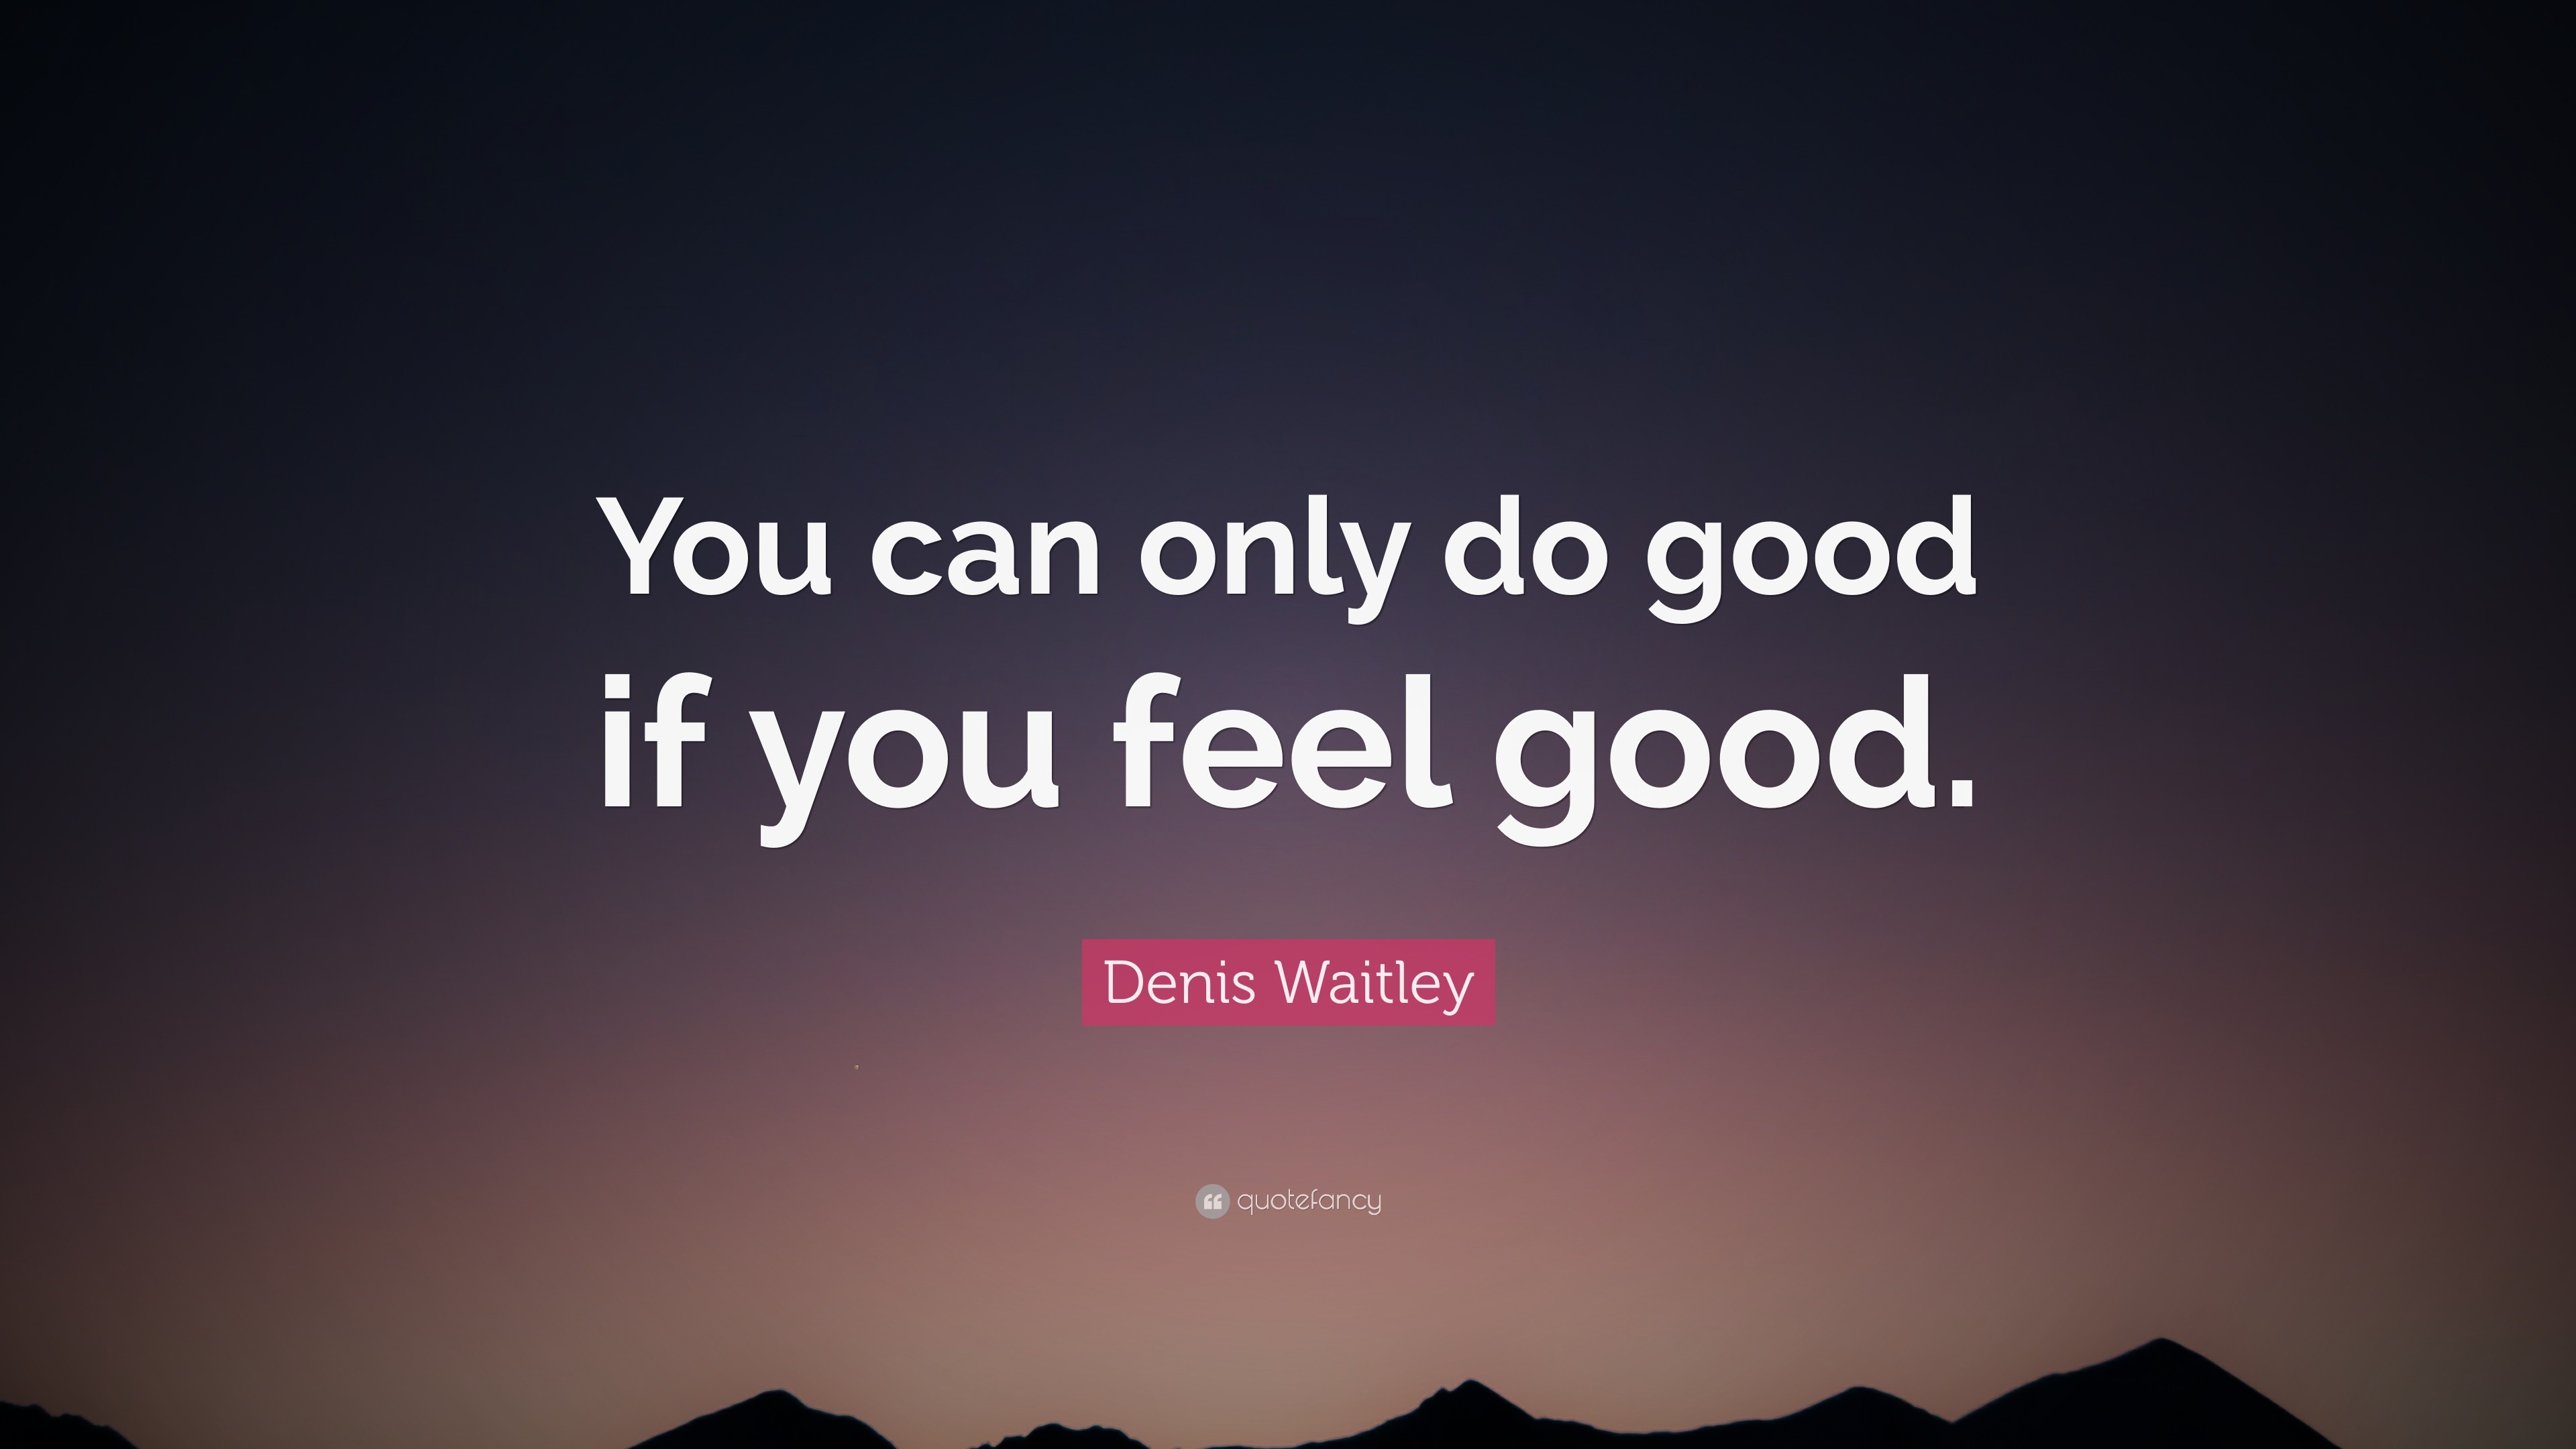 Denis Waitley Quote: "You can only do good if you feel good." (12 wallpapers) - Quotefancy